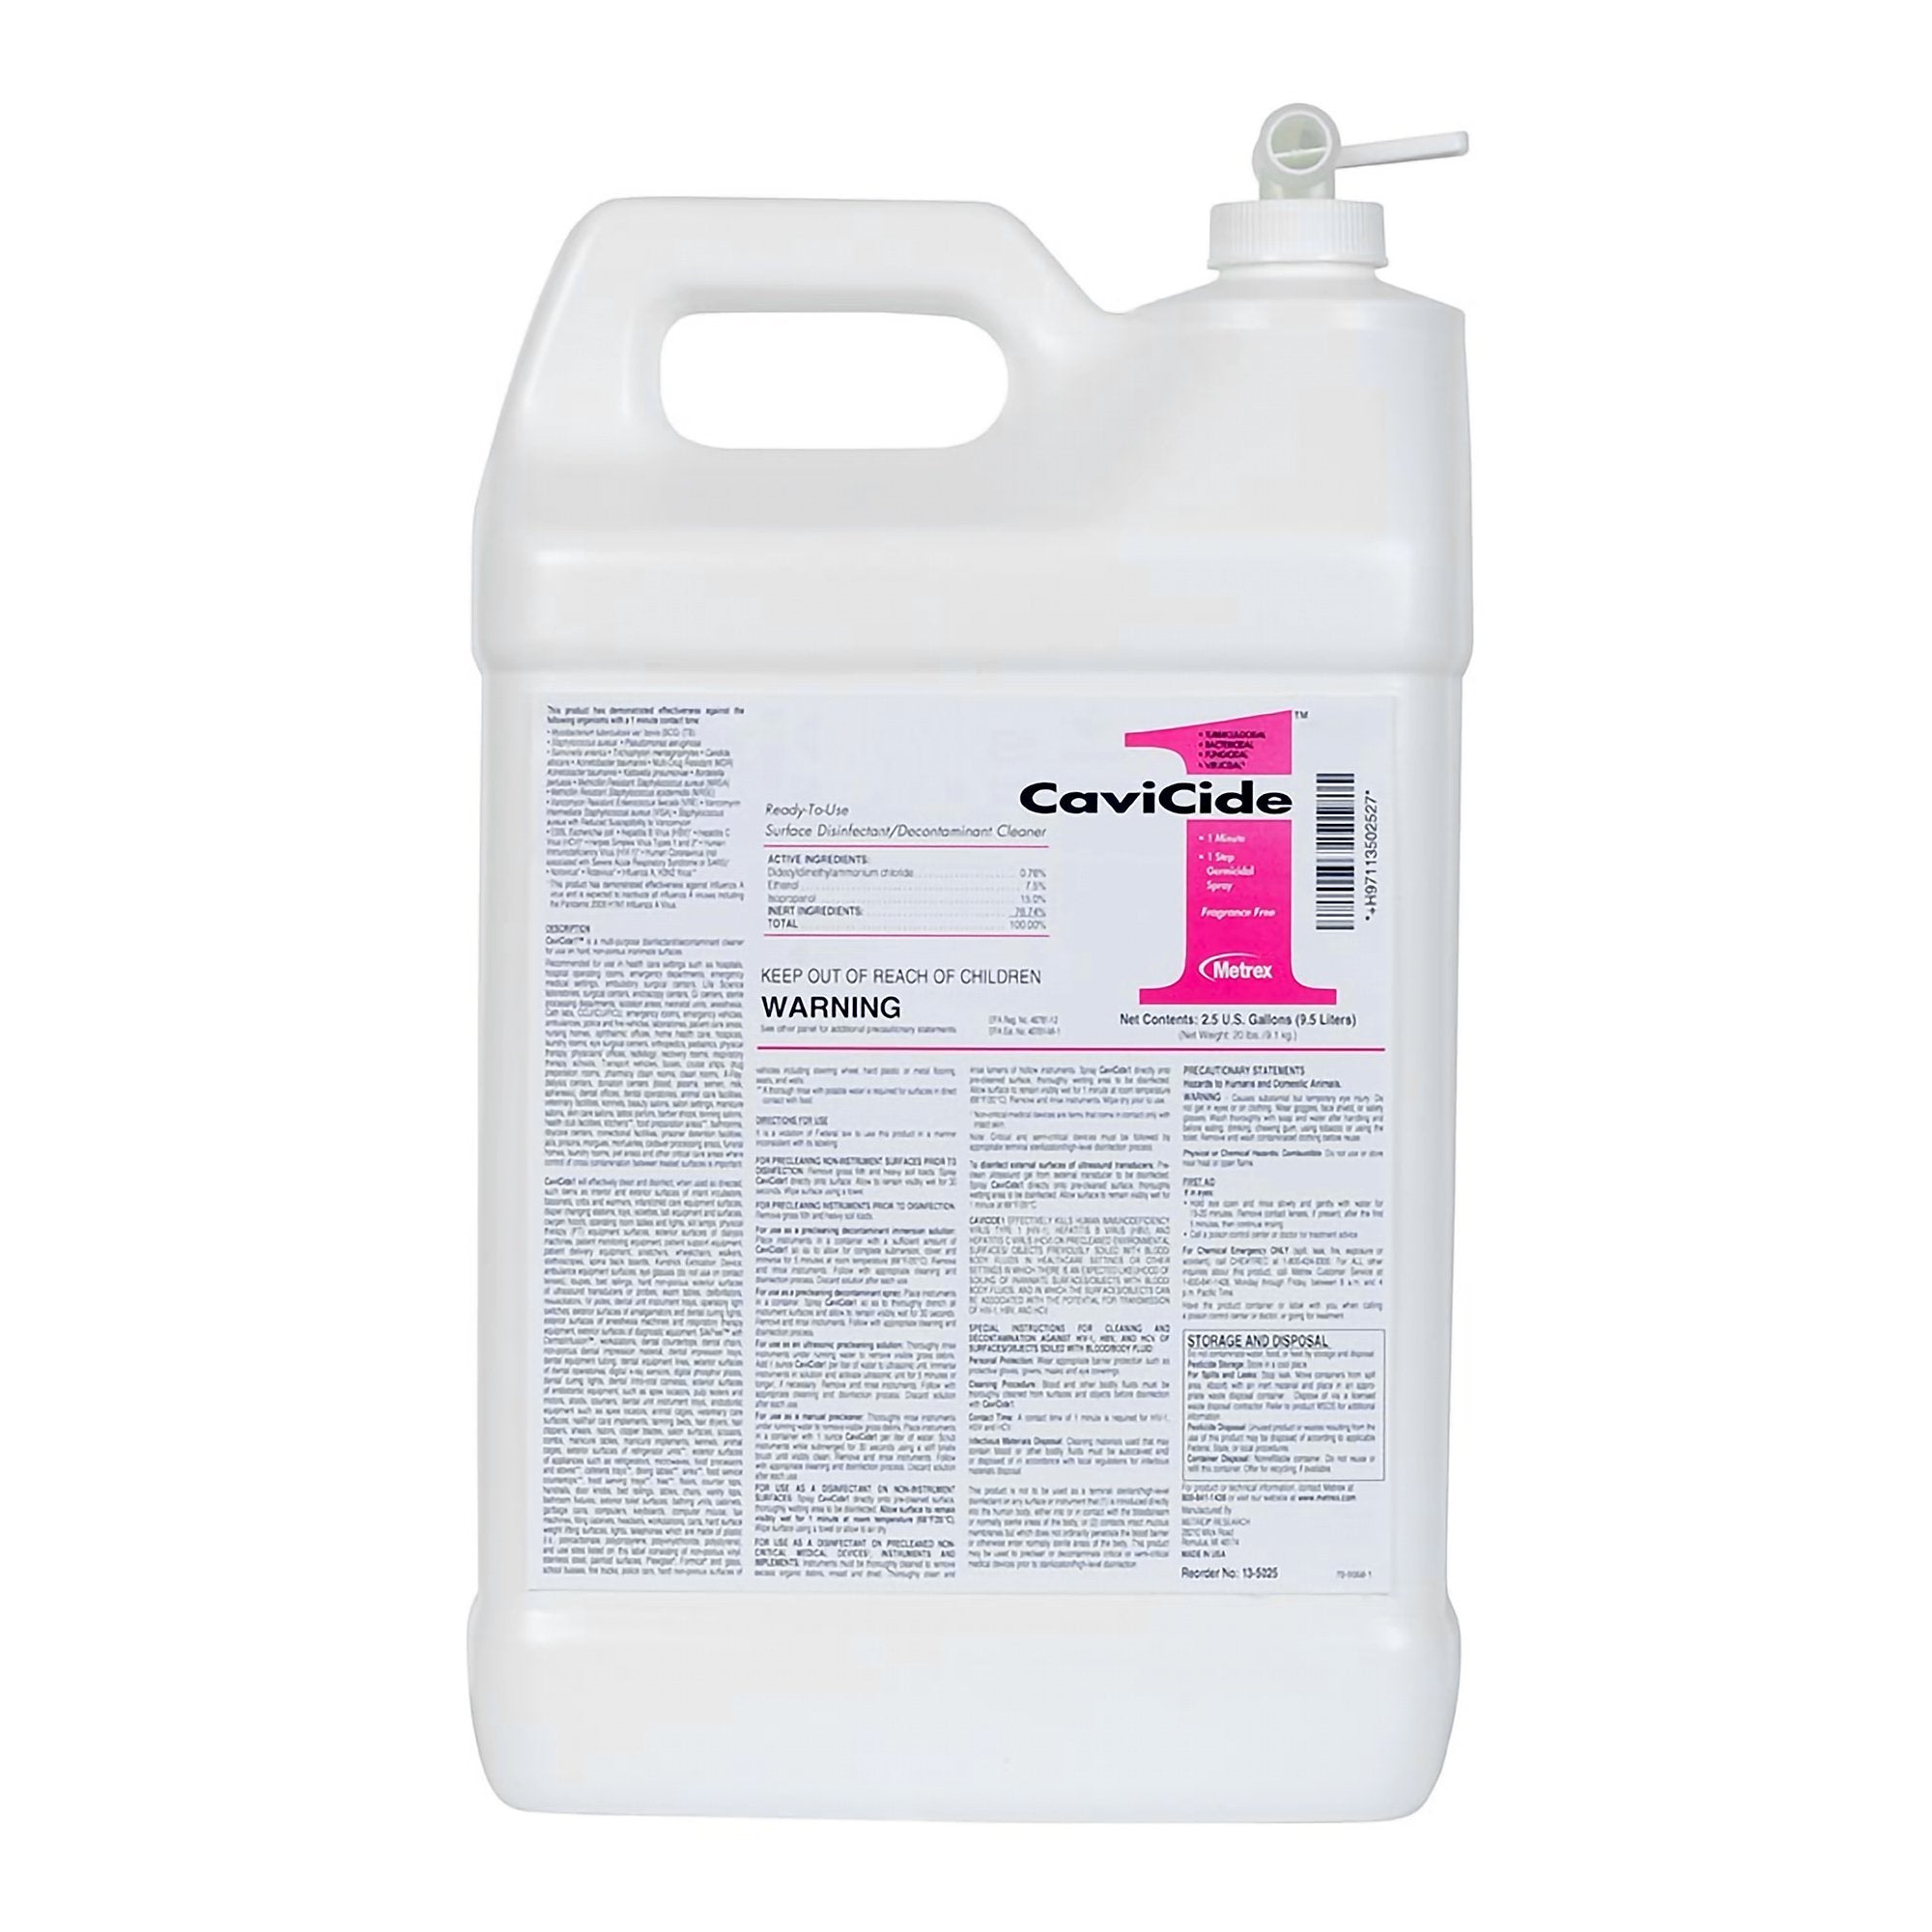 CaviCide1™ Surface Disinfectant Cleaner Alcohol Based Manual Pour Liquid 2.5 gal. Jug Alcohol Scent NonSterile